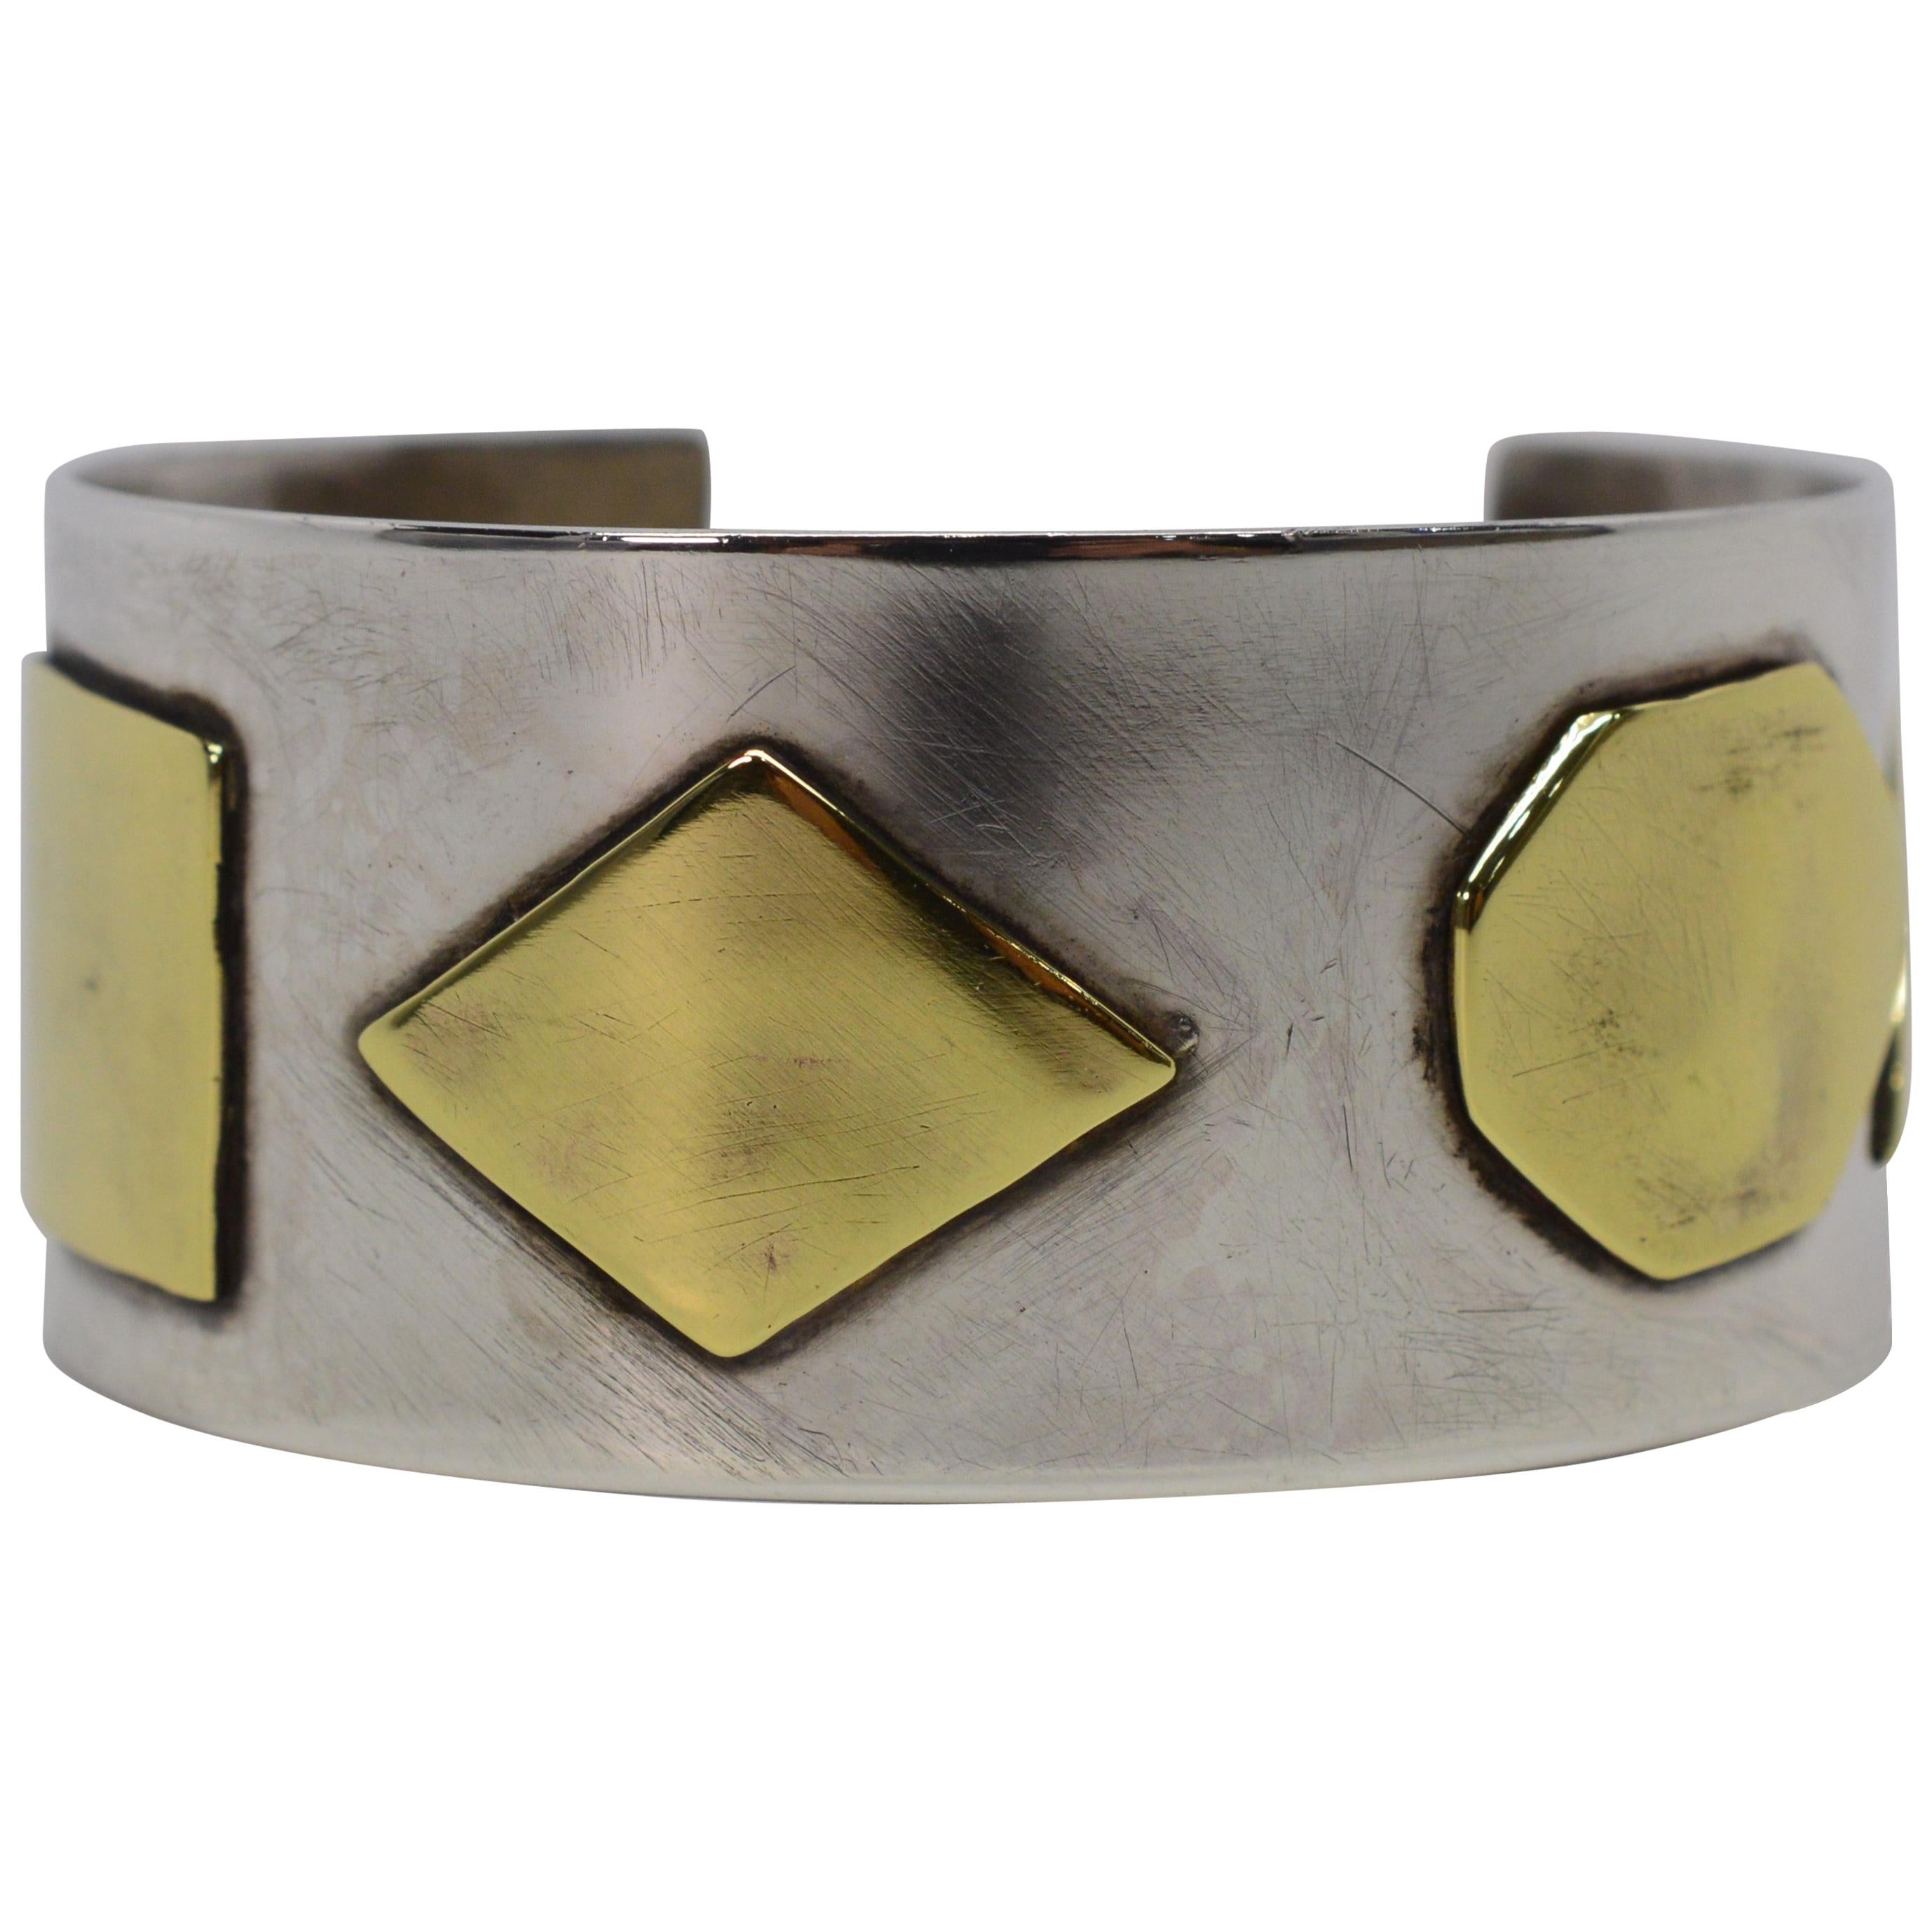 Craft Sterling Silver Cuff Bracelet with Brass Appliques